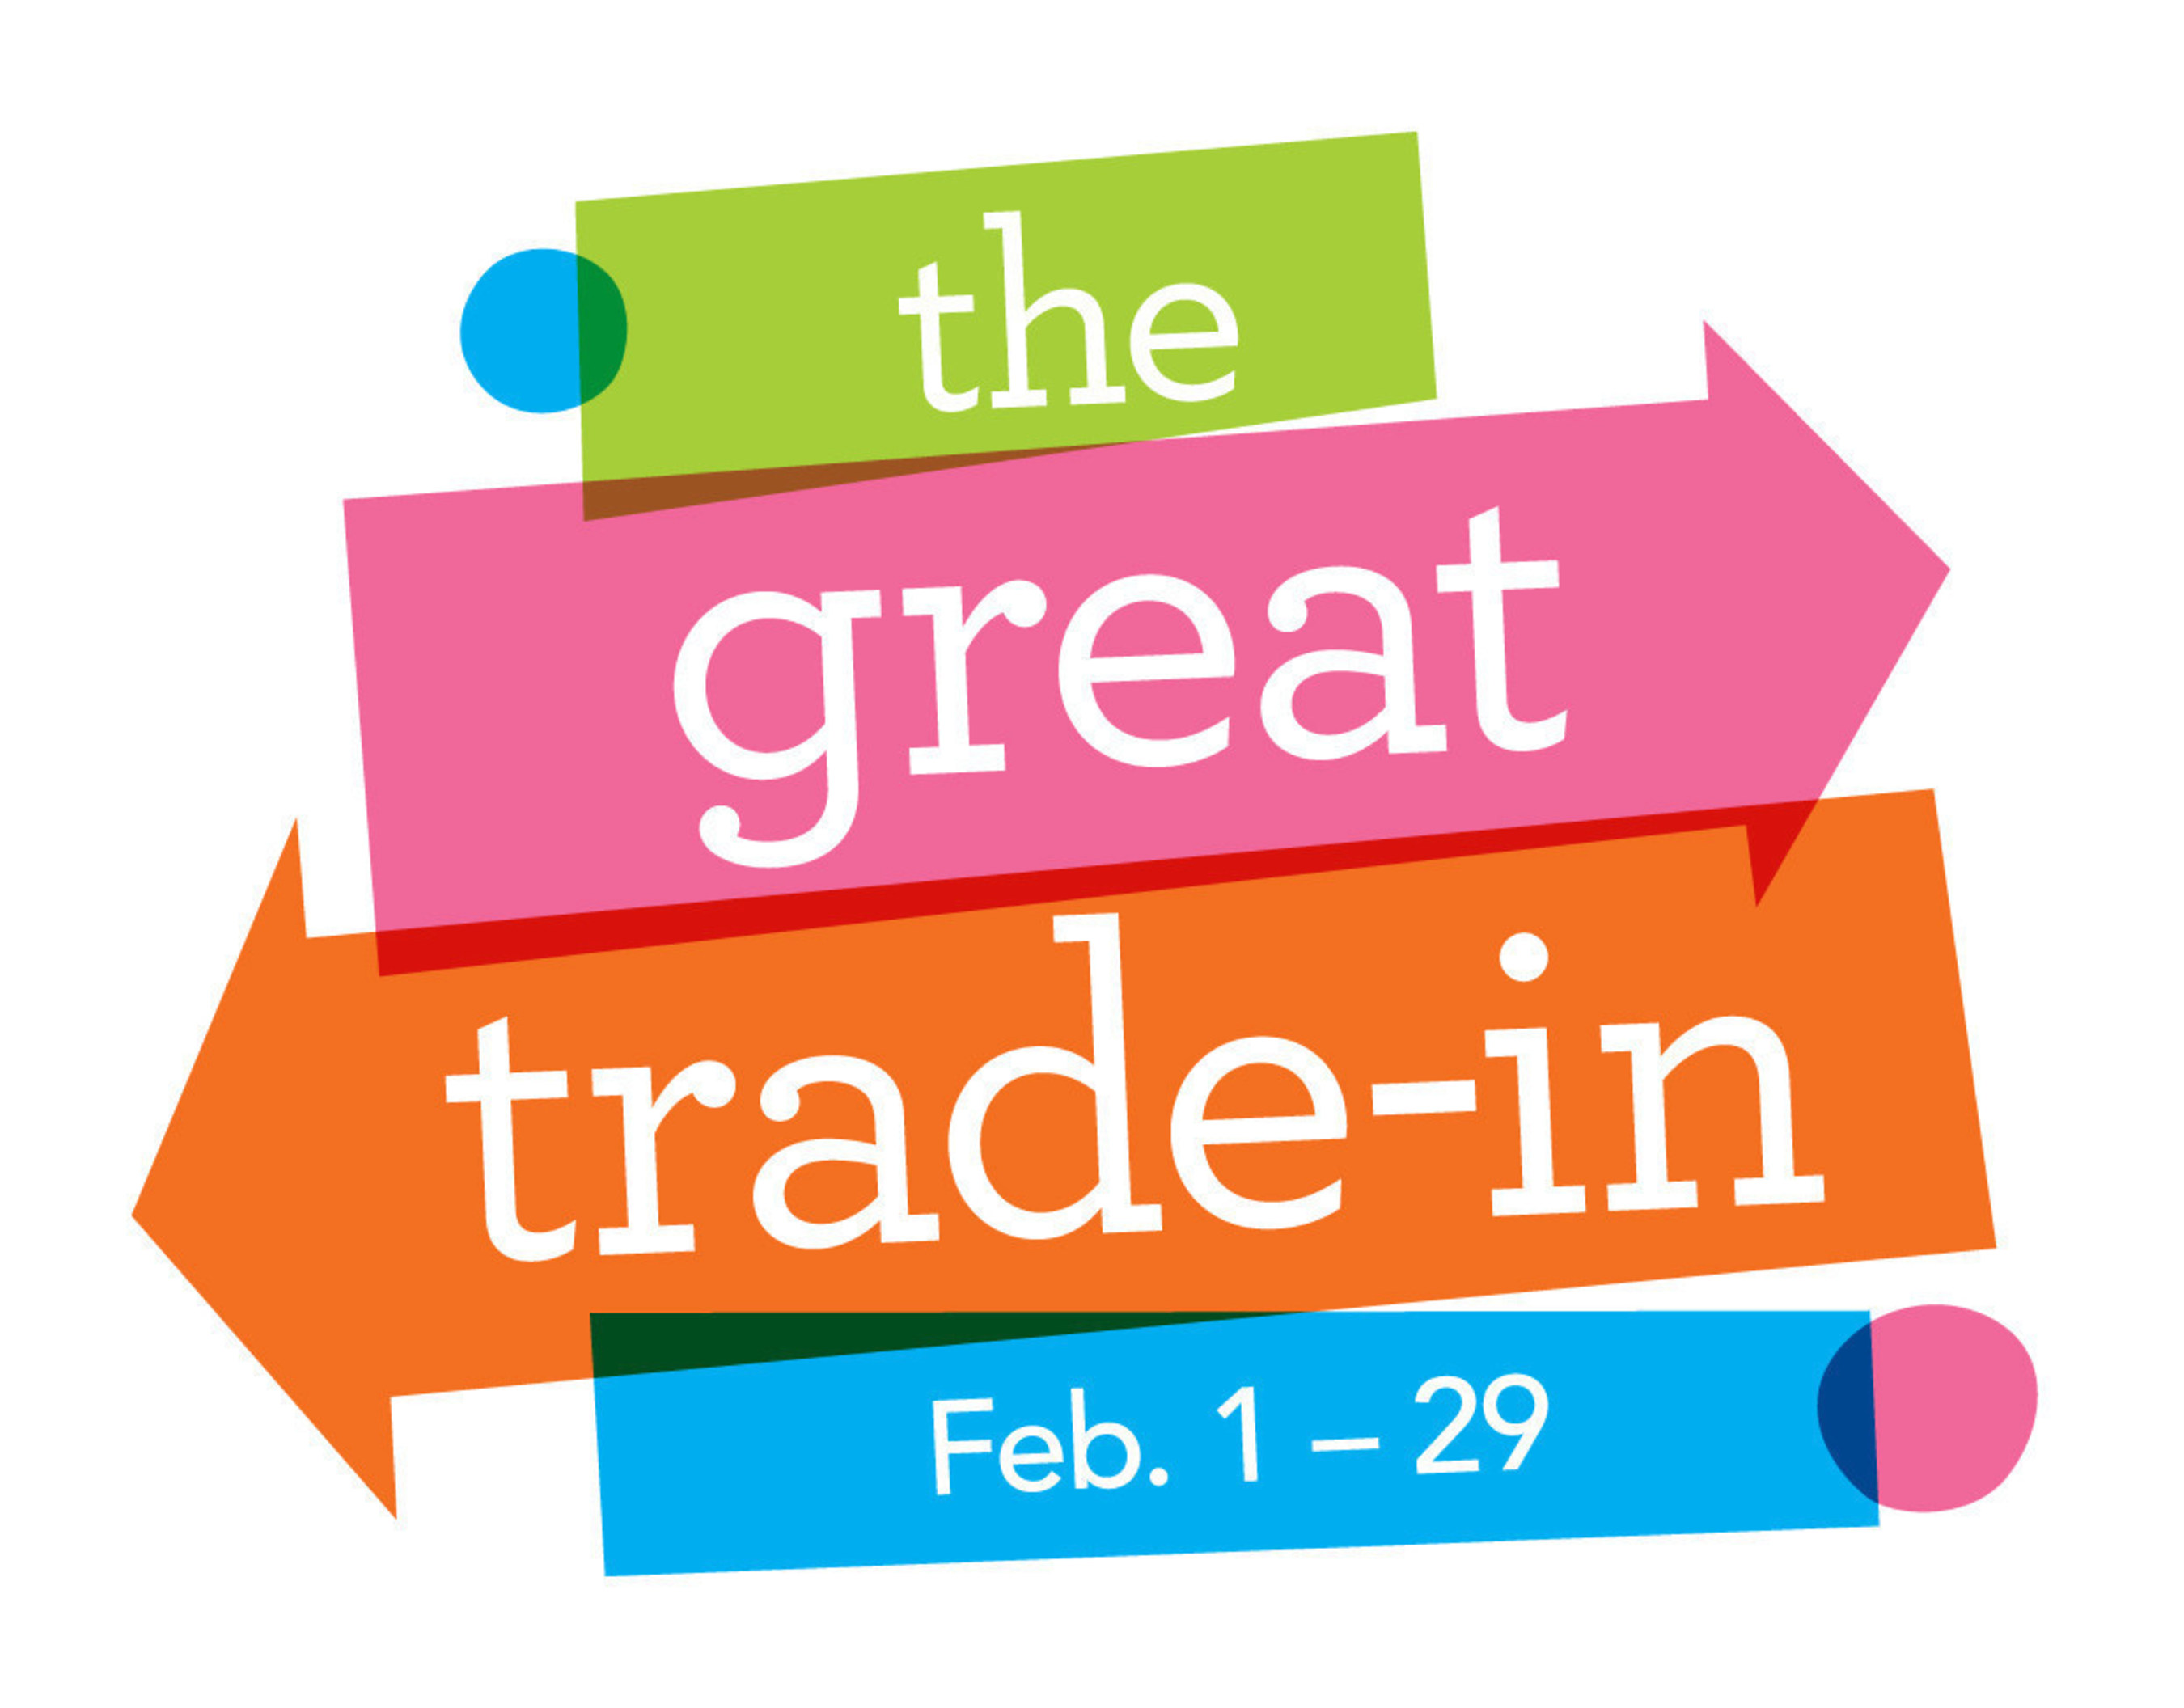 The Great Trade-In event returns to Babies"R"Us and Toys"R"Us stores nationwide